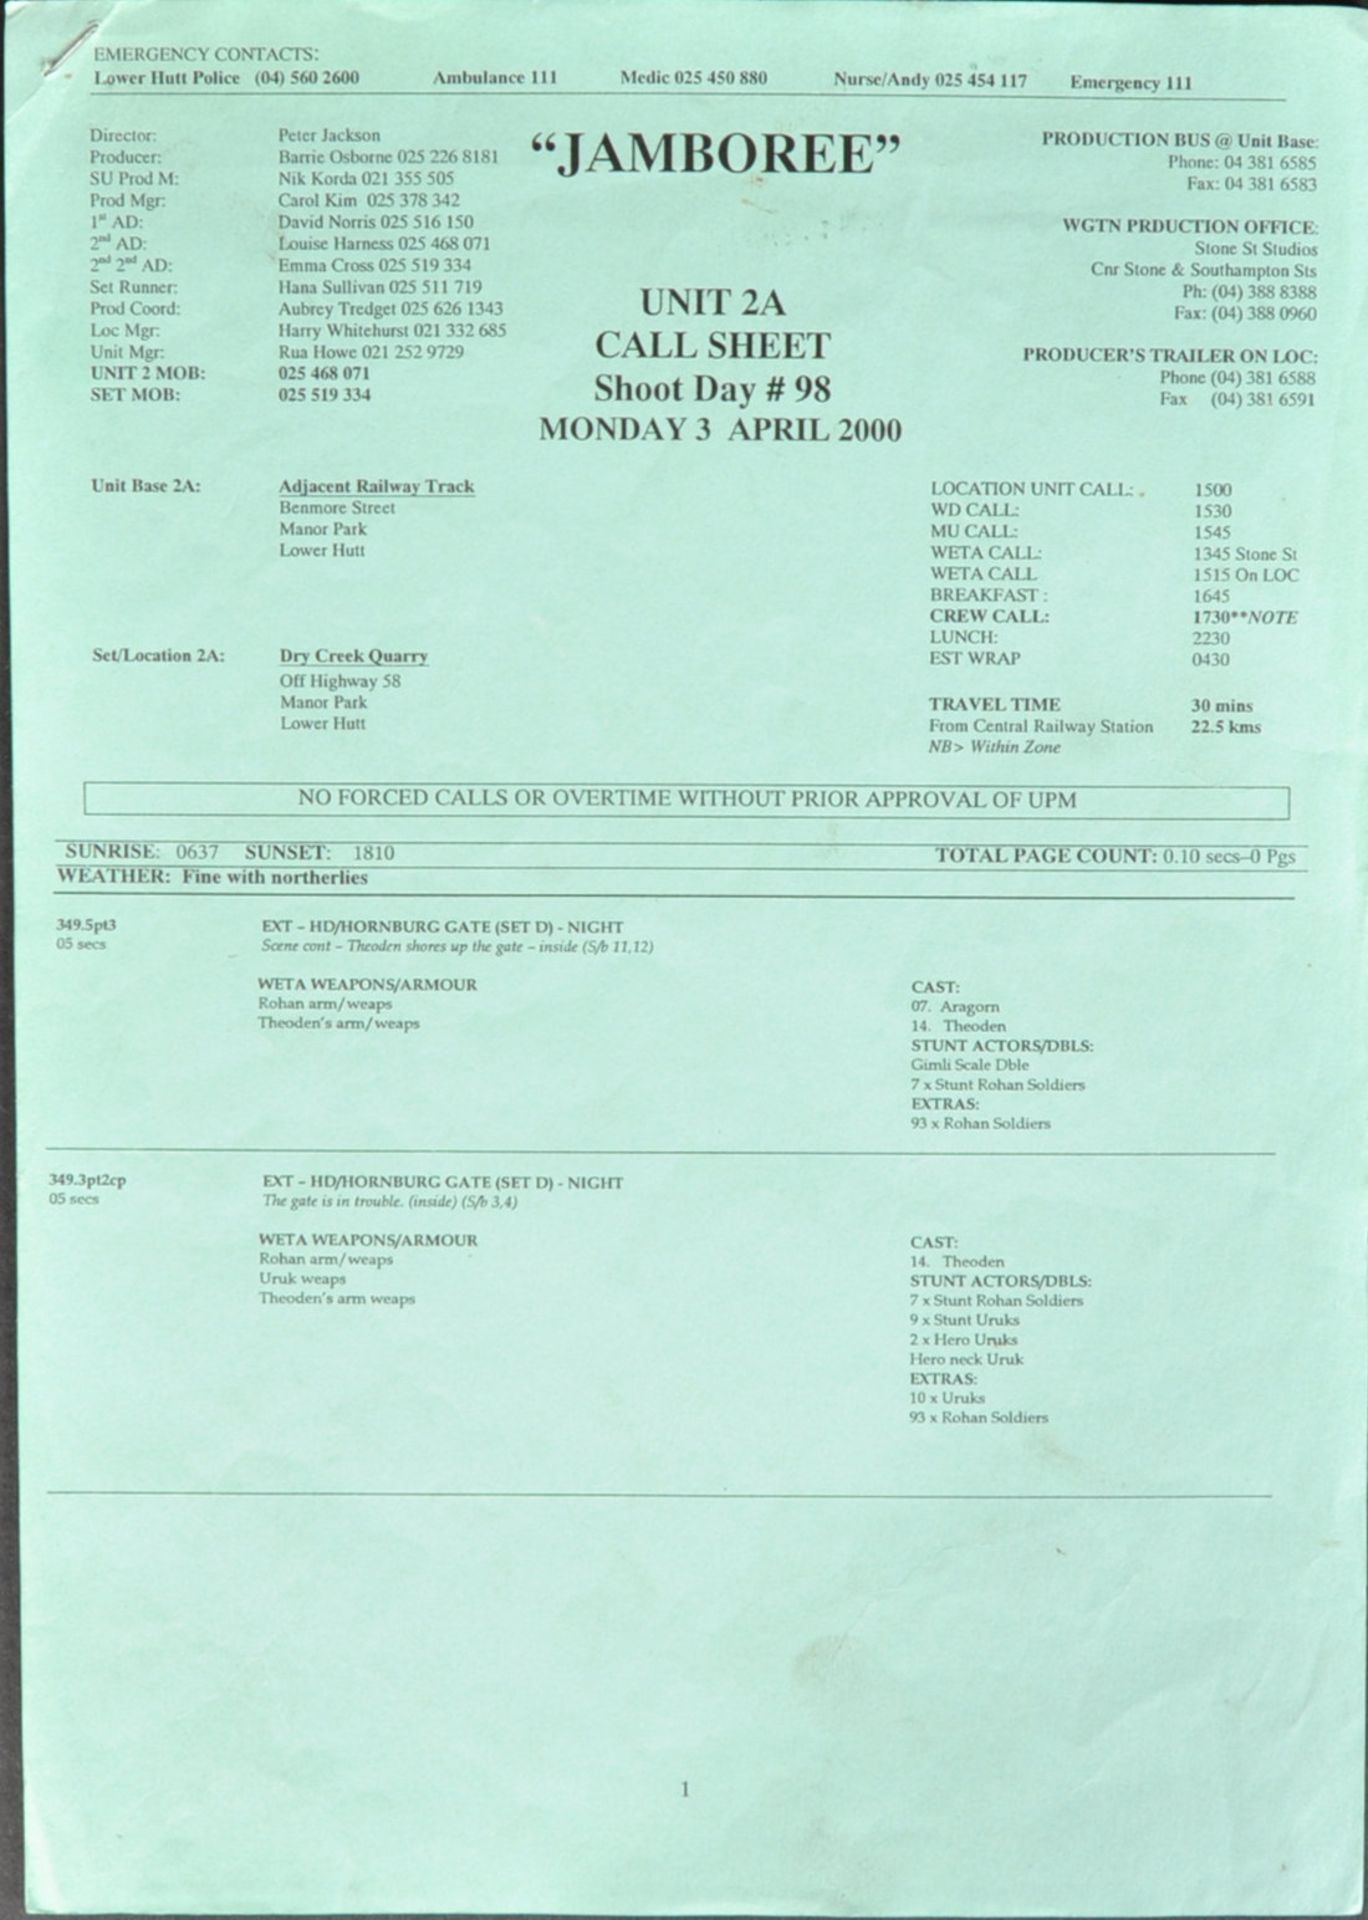 LORD OF THE RINGS - PRODUCTION USED "JAMBOREE" CALL SHEET